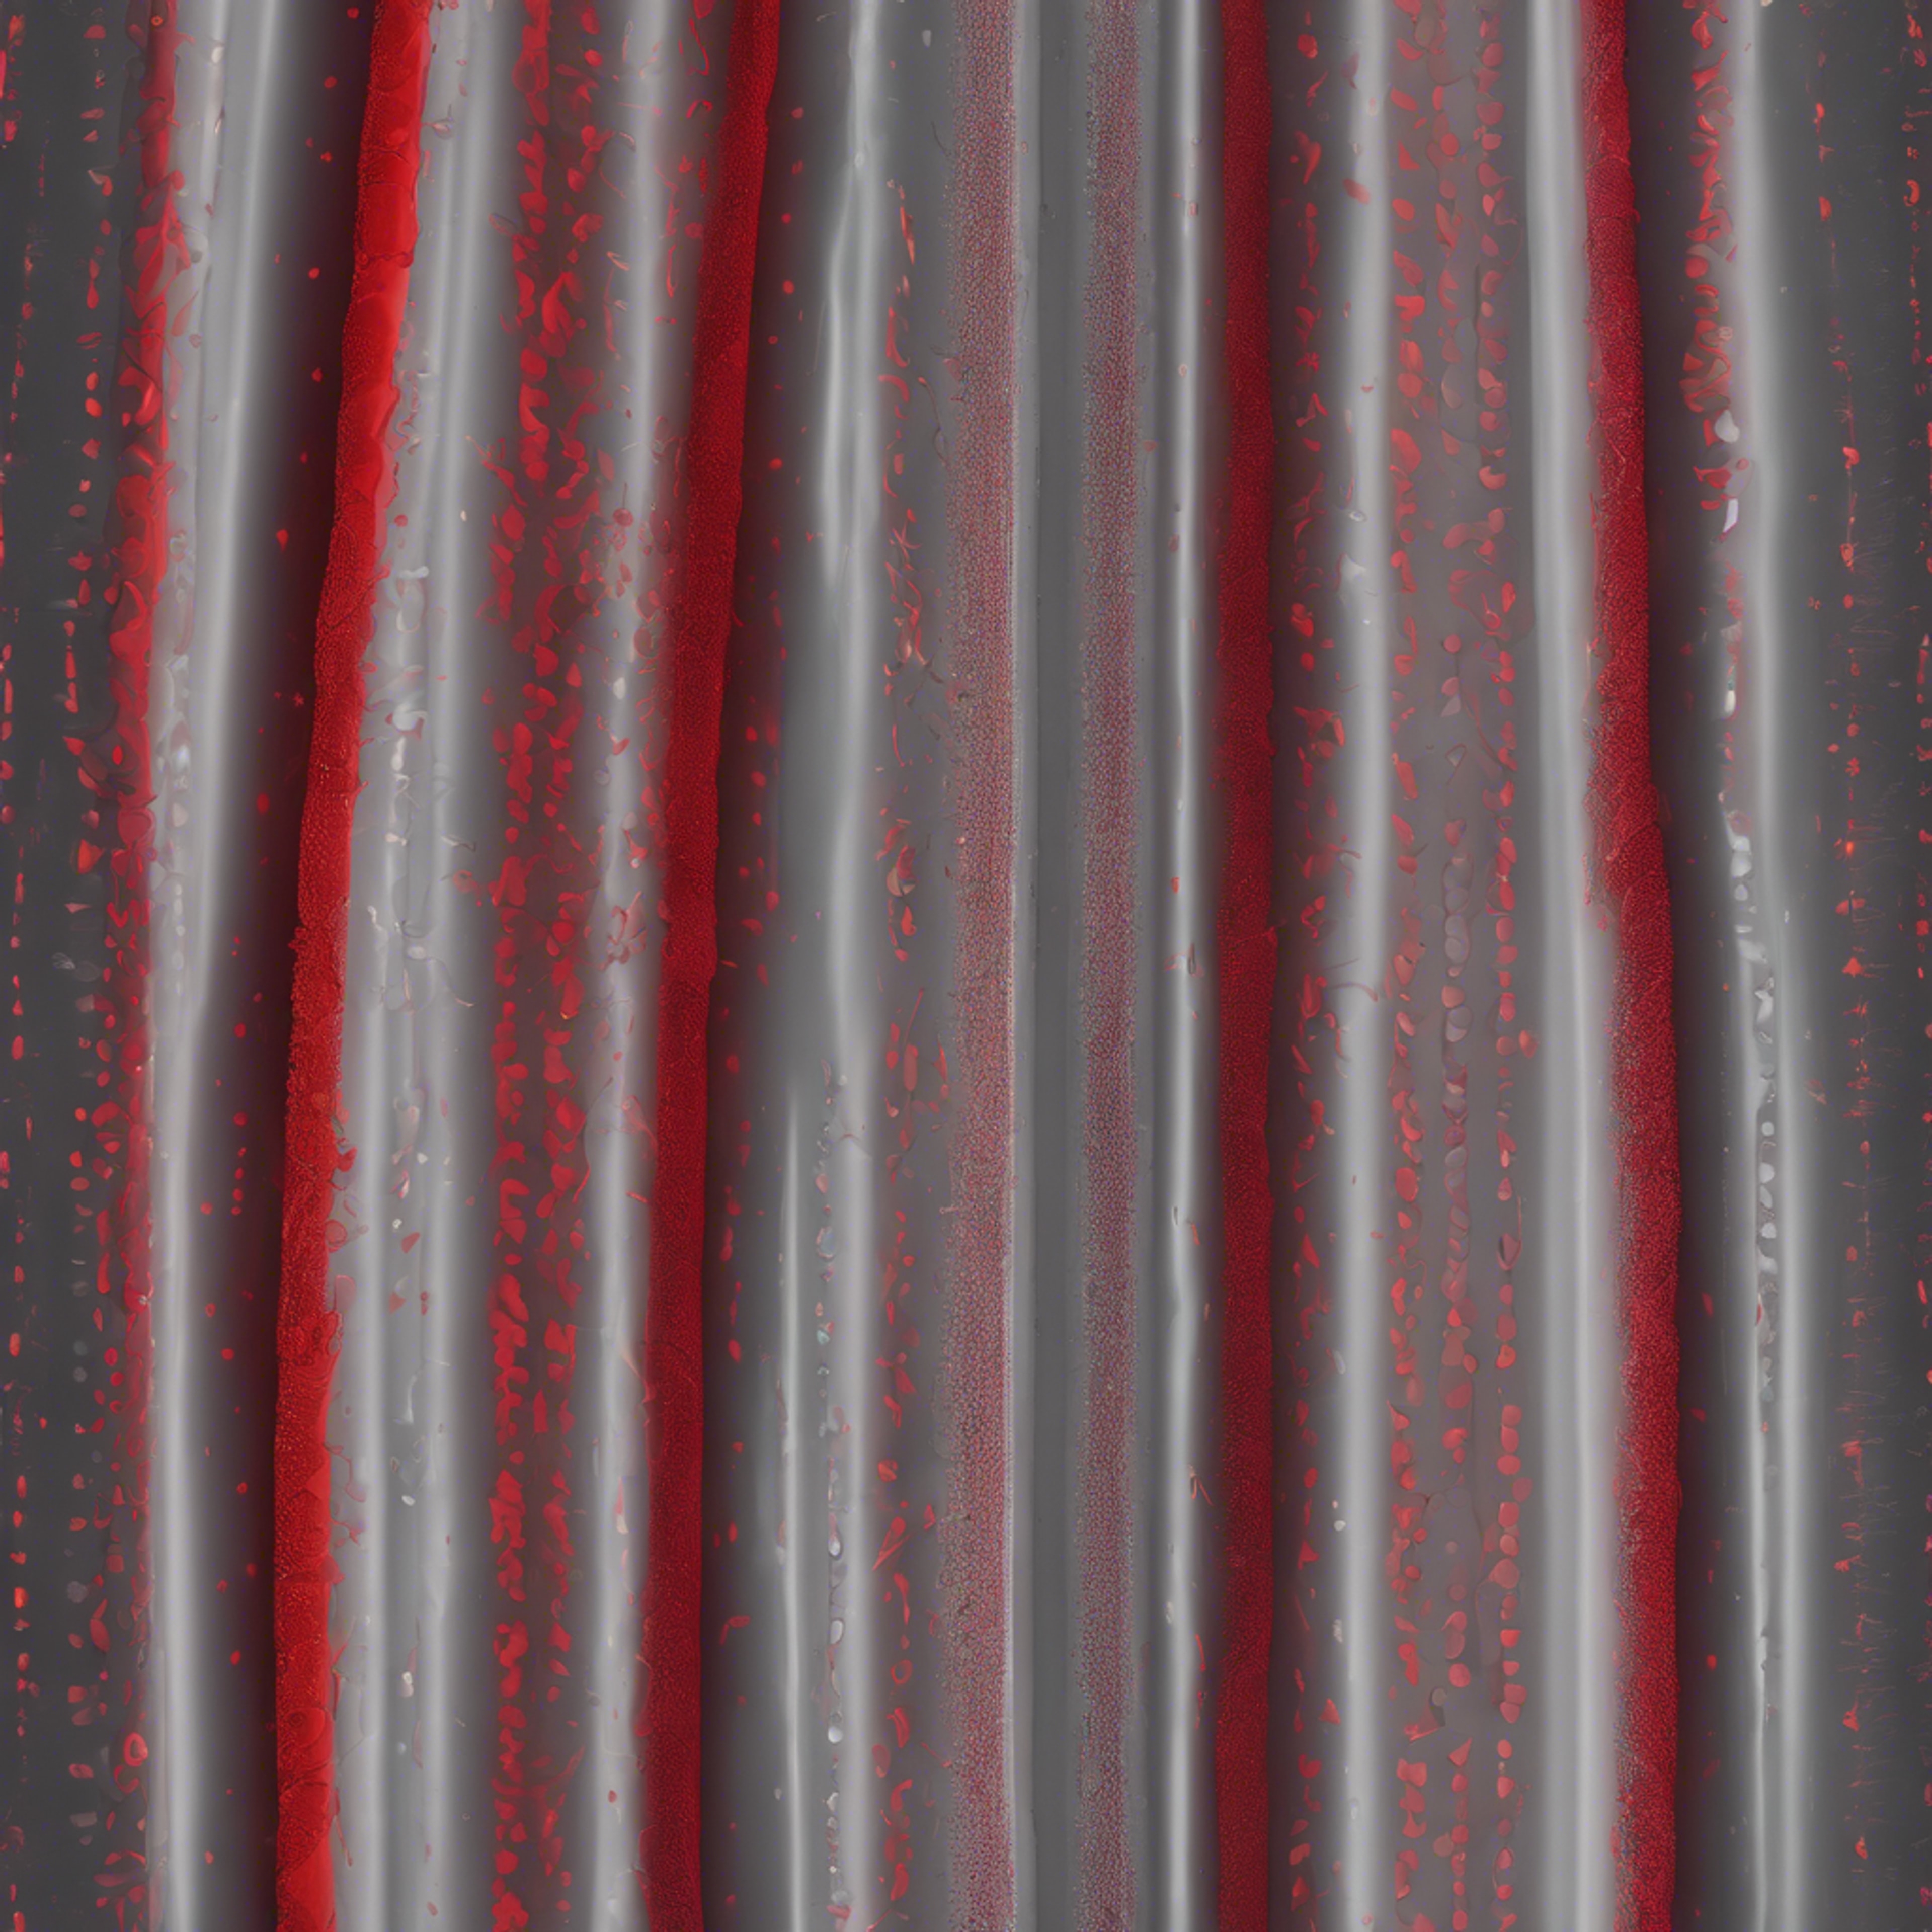 An abstract pattern with hallucinogenic red and grey gradients blending into each other. 벽지[5c97b162f4f748b39a07]